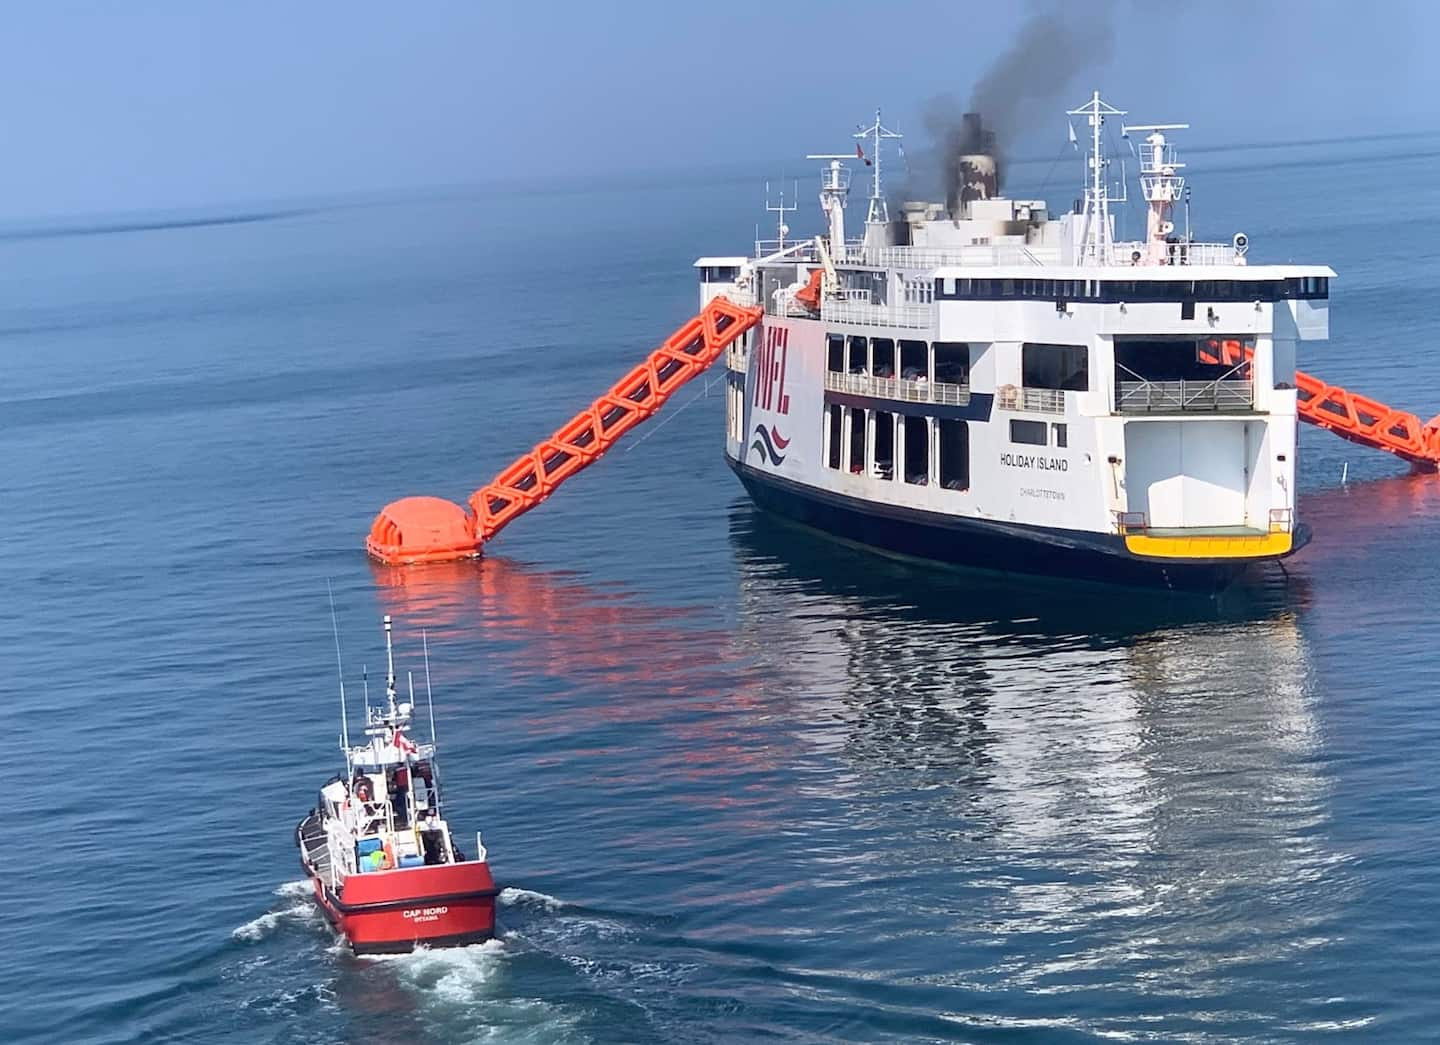 Fire on a ferry: an investigation opened in Prince Edward Island